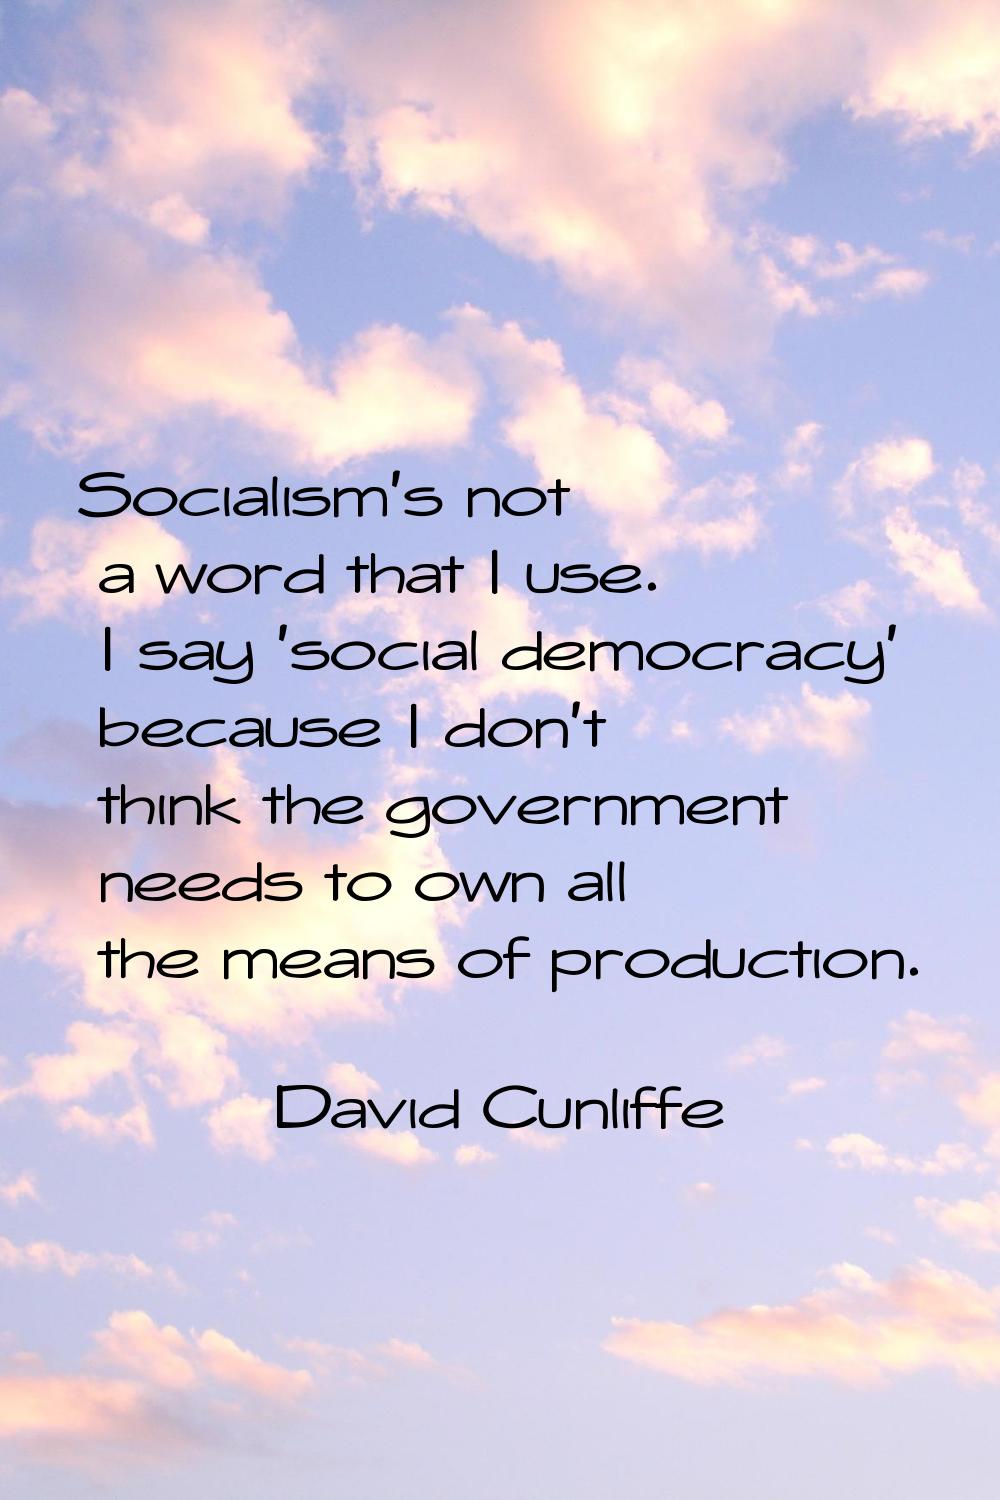 Socialism's not a word that I use. I say 'social democracy' because I don't think the government ne